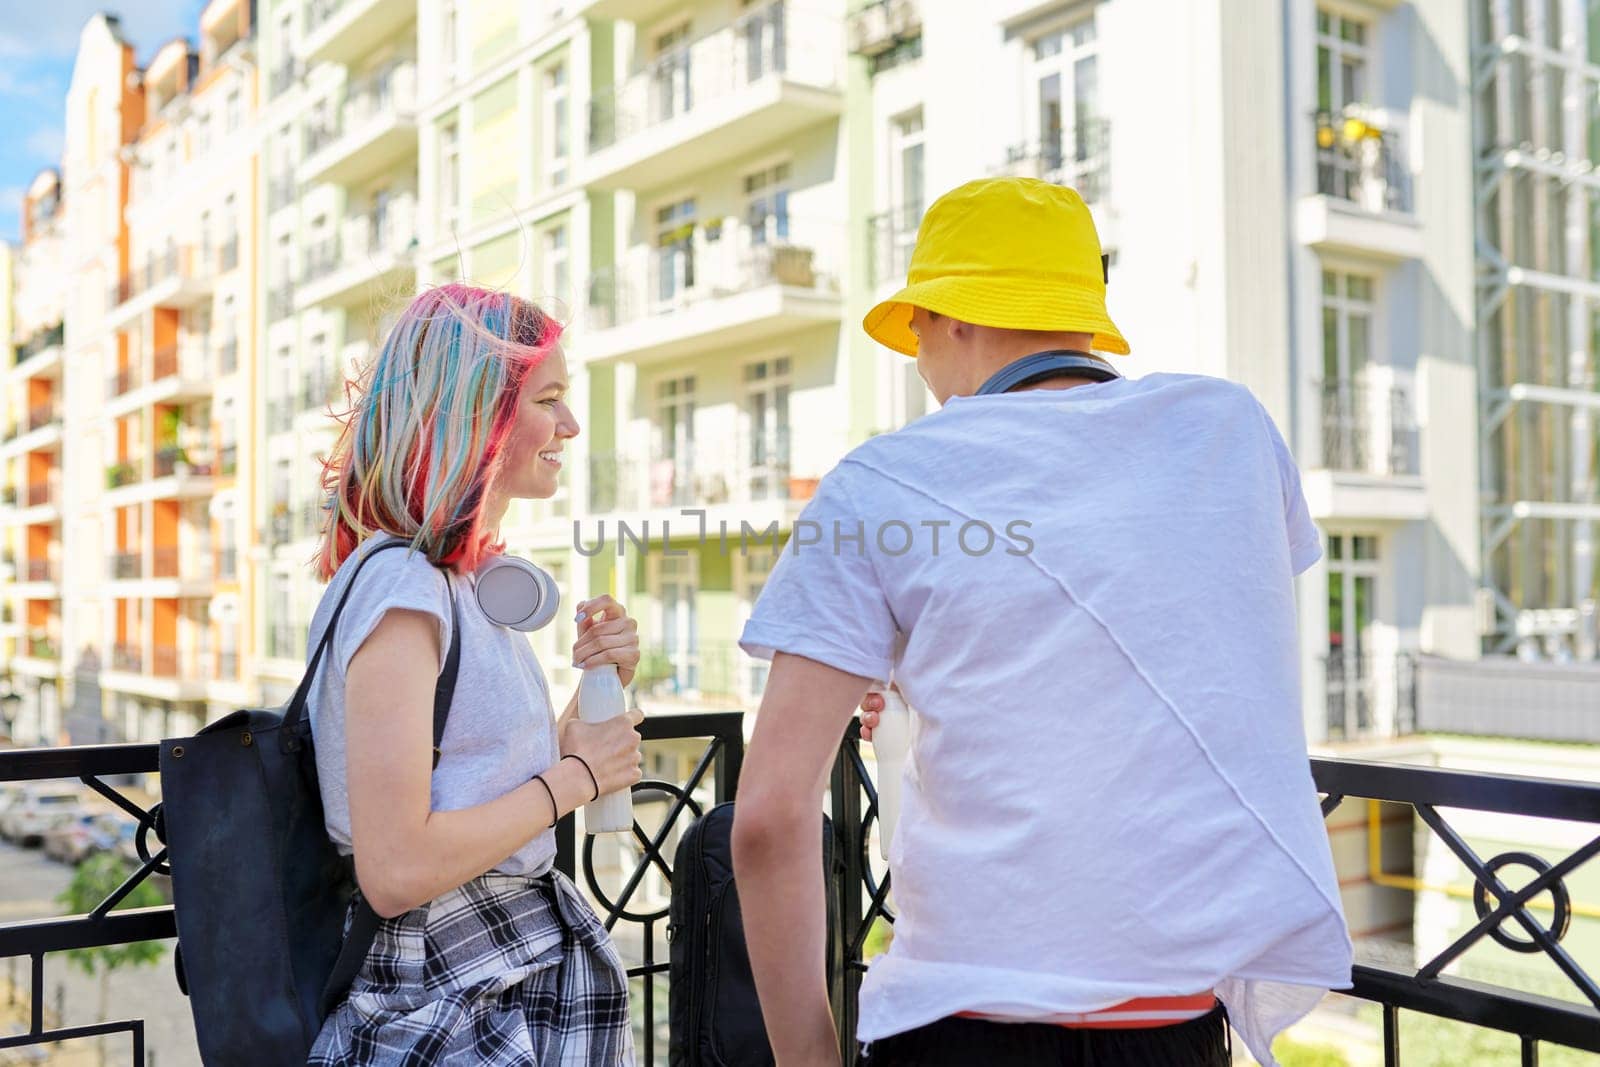 Urban lifestyle of teenagers, couple of college students talking having rest drinking milk drink by VH-studio